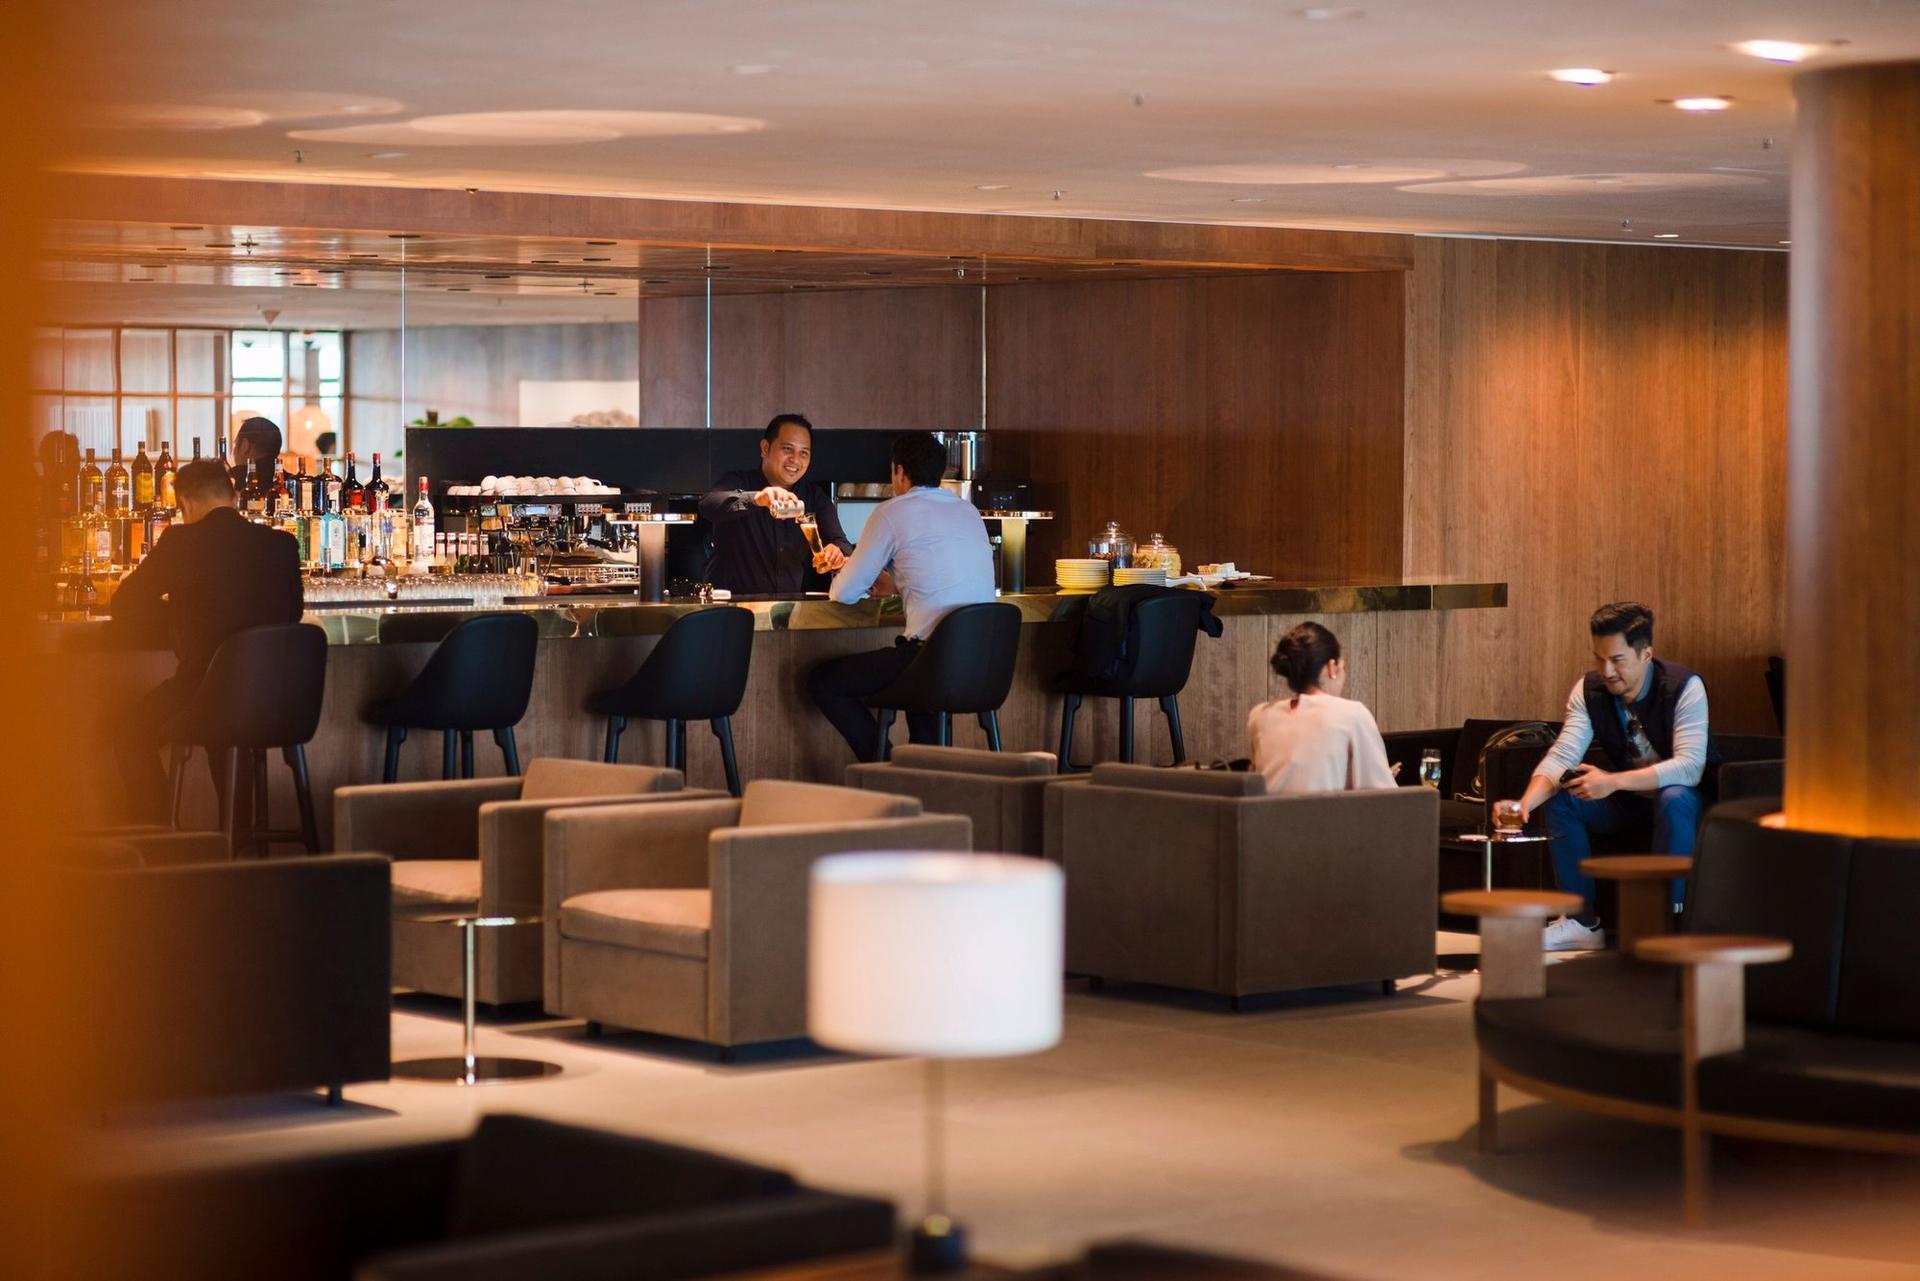 Cathay Pacific The Pier Business Class Lounge image 16 of 61